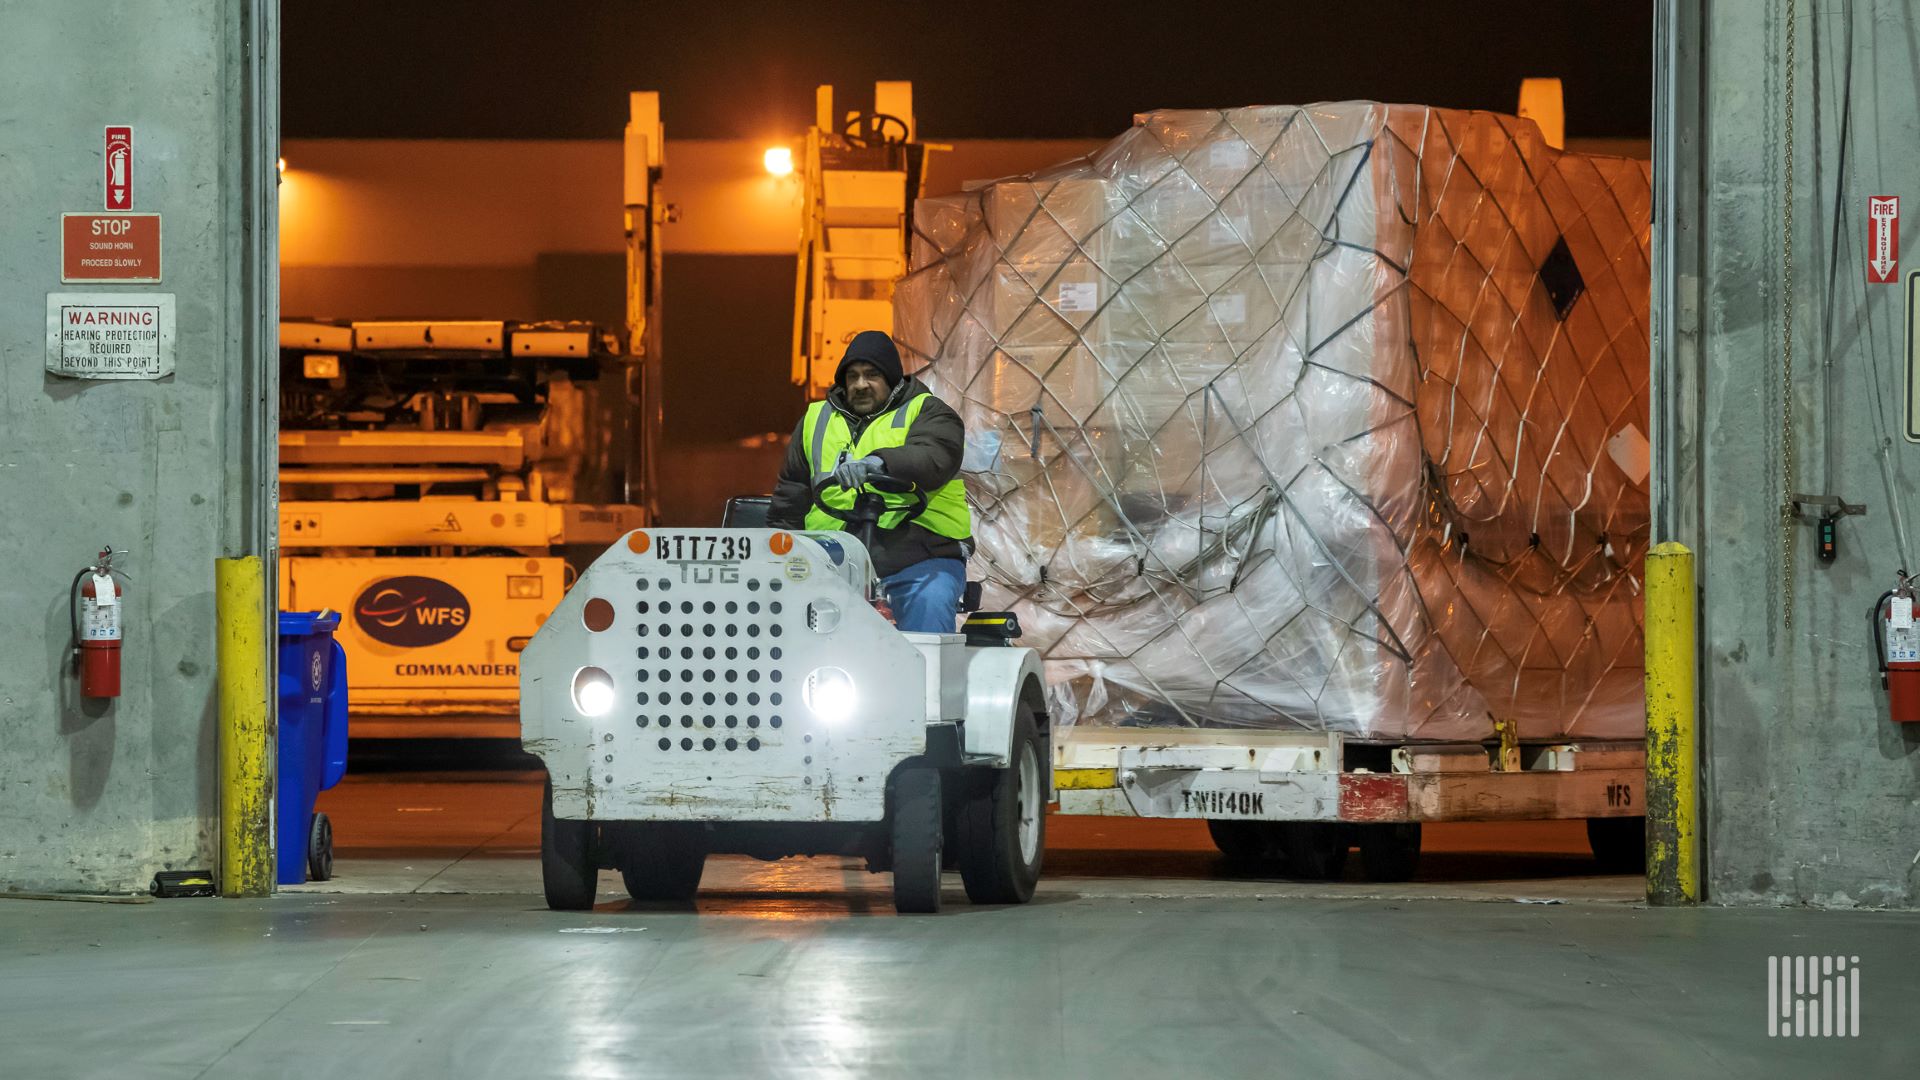 A motorized tug pulls a large air cargo pallet into a warehouse.